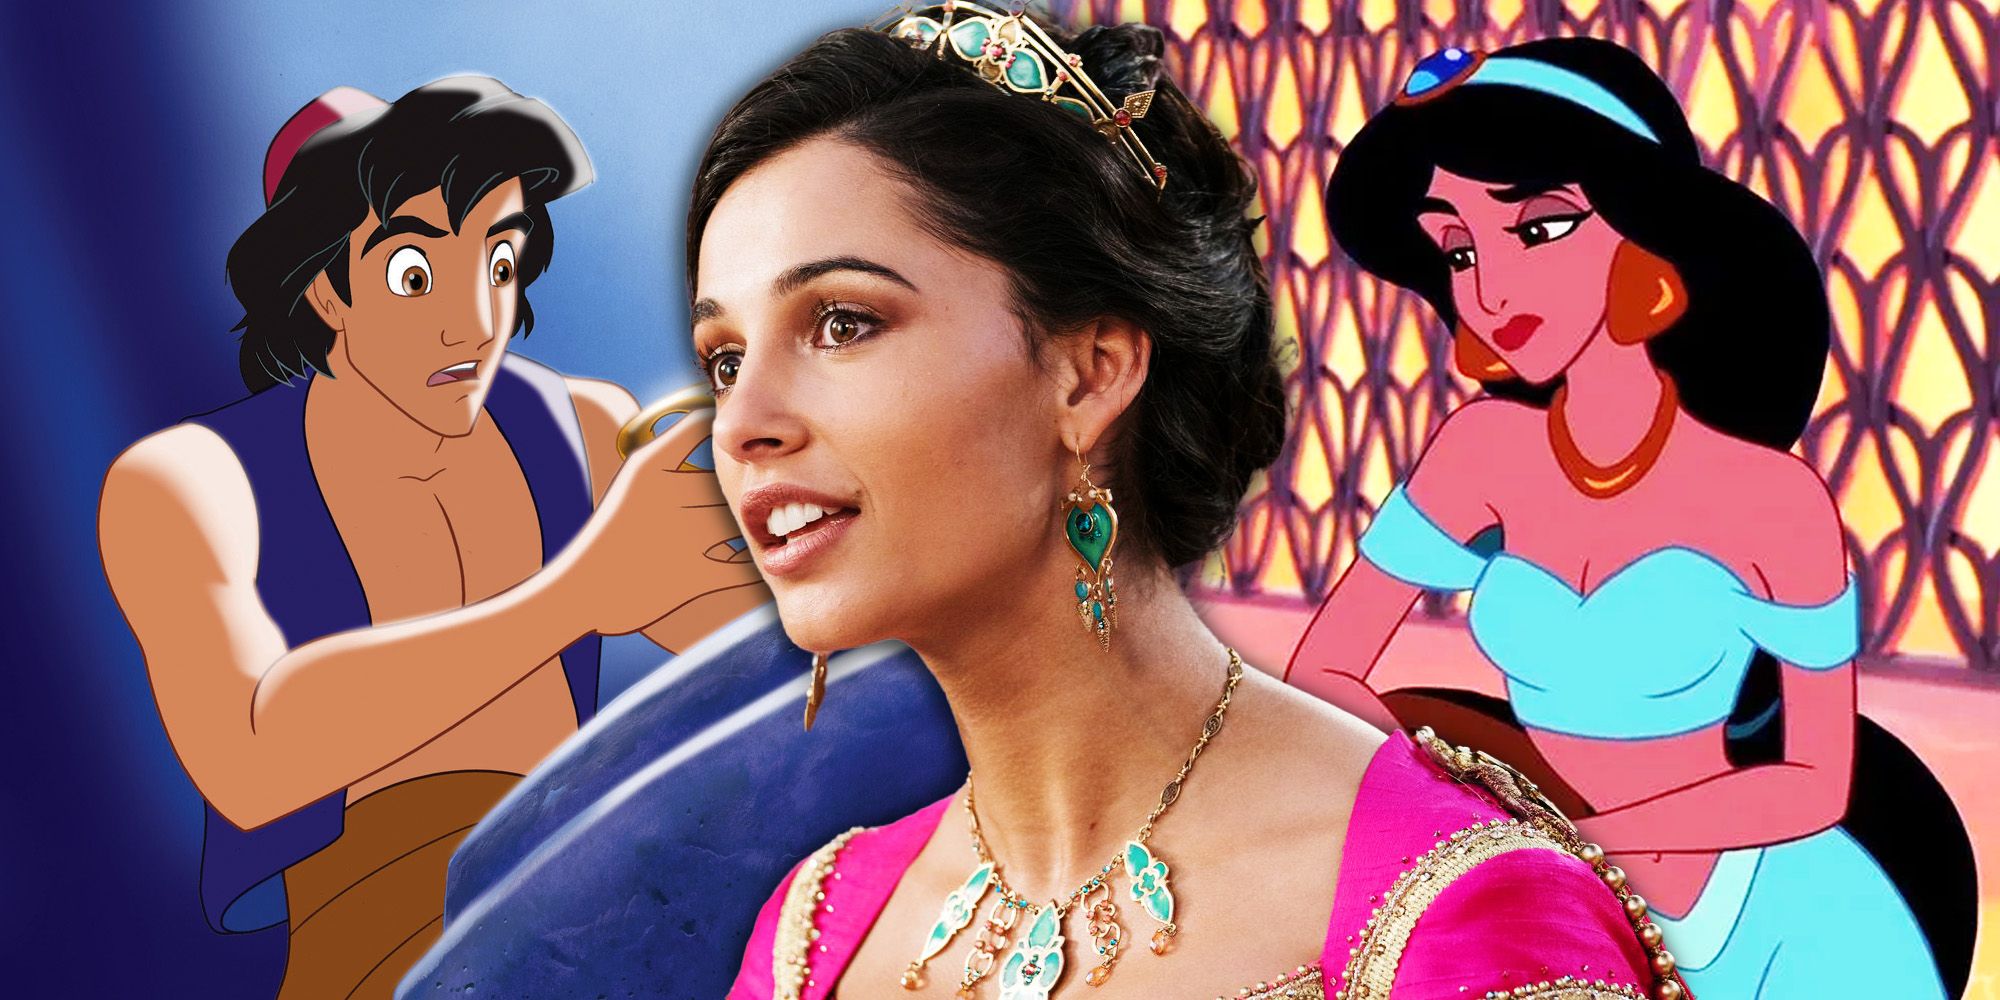 Aladdin and Jasmine from cartoon and live-action movie